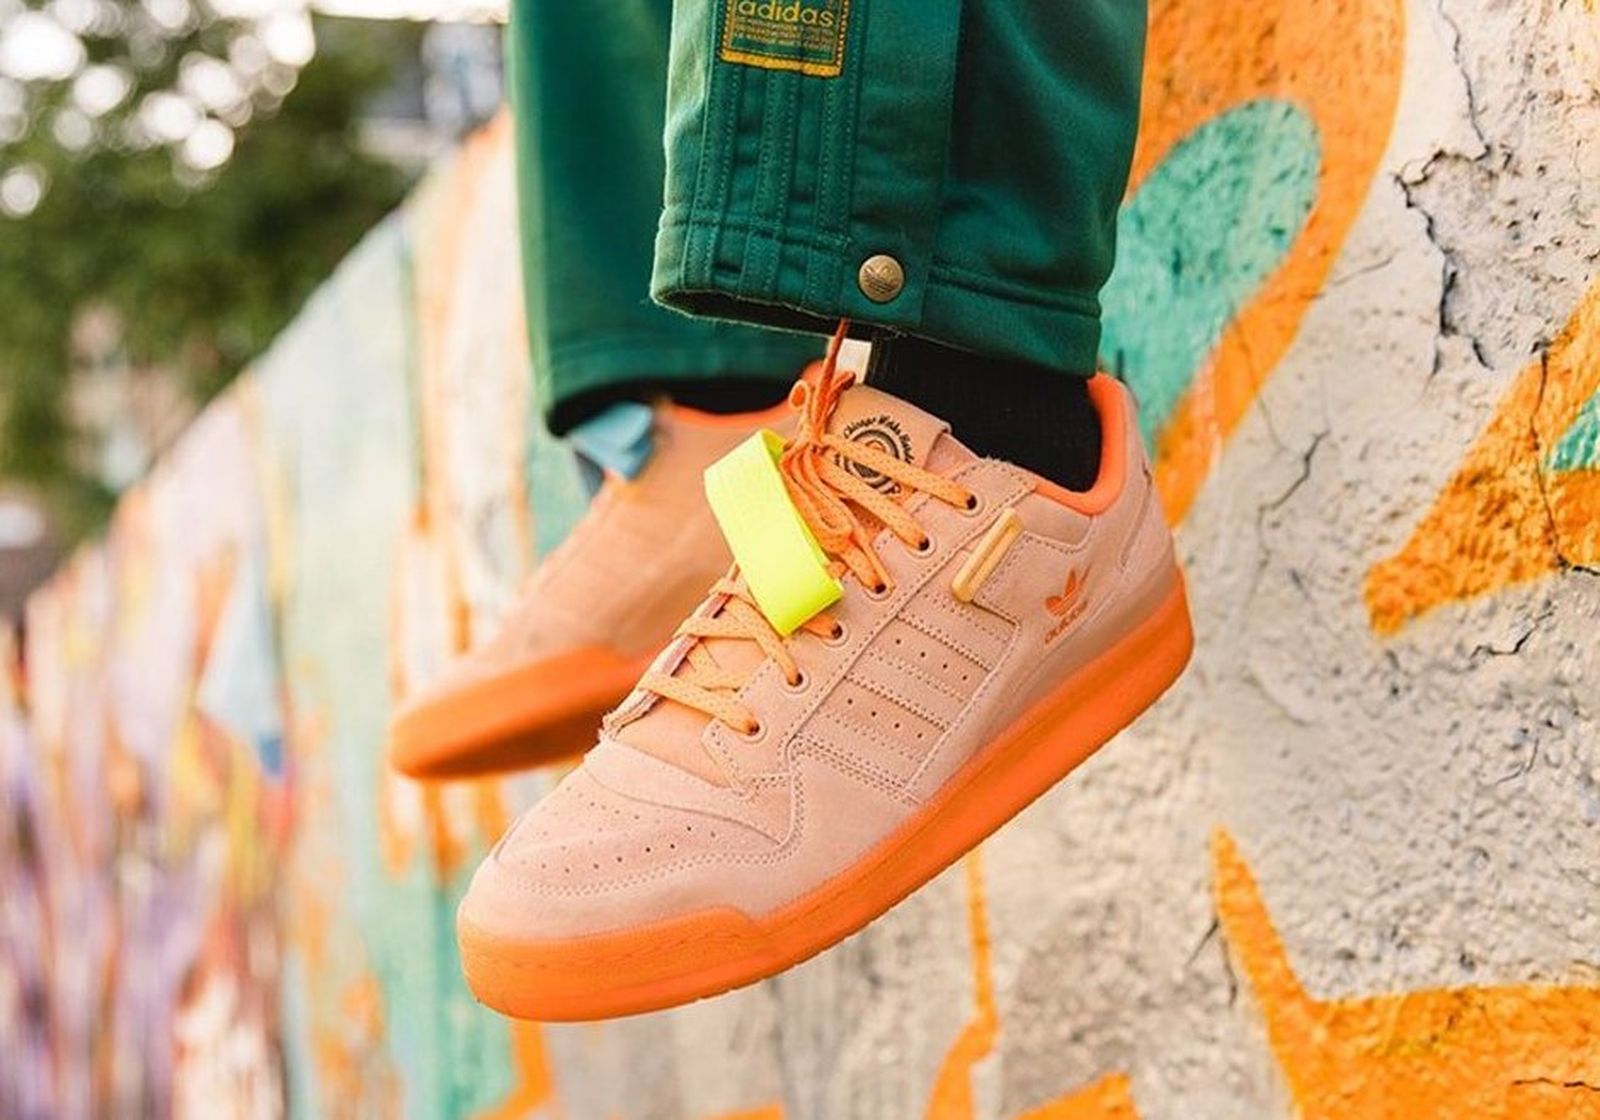 Vic Lloyd x adidas Forum Low on-foot image outside